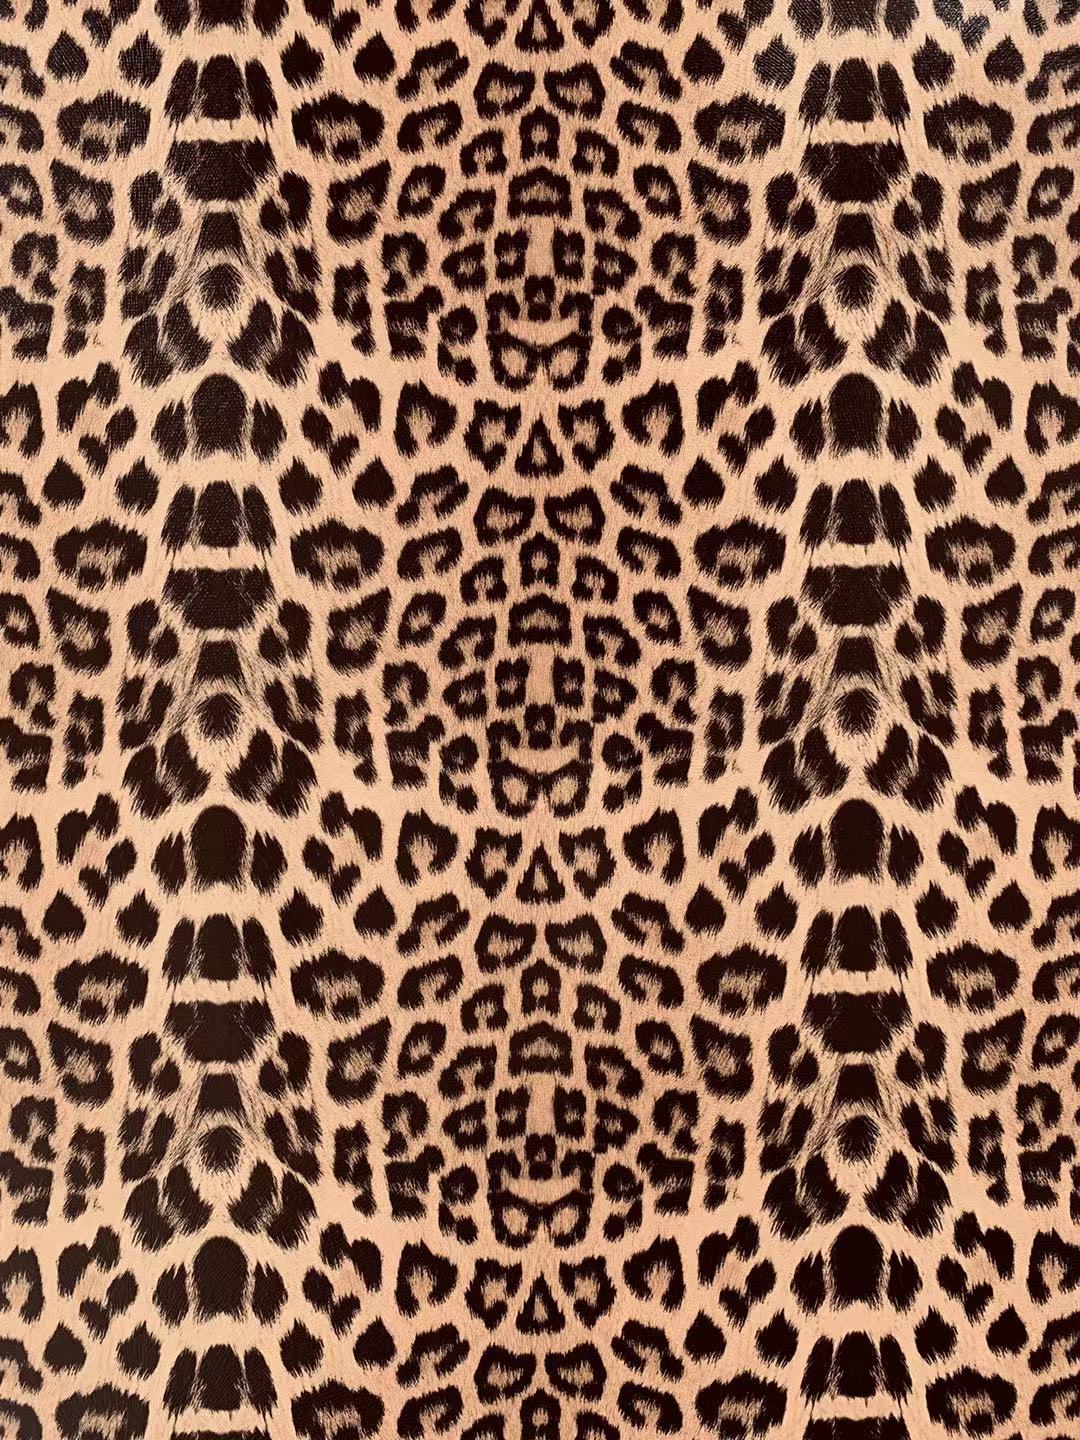 Fashion Leopard Reflective Leather Fabric For Handmade Goods(Tan)